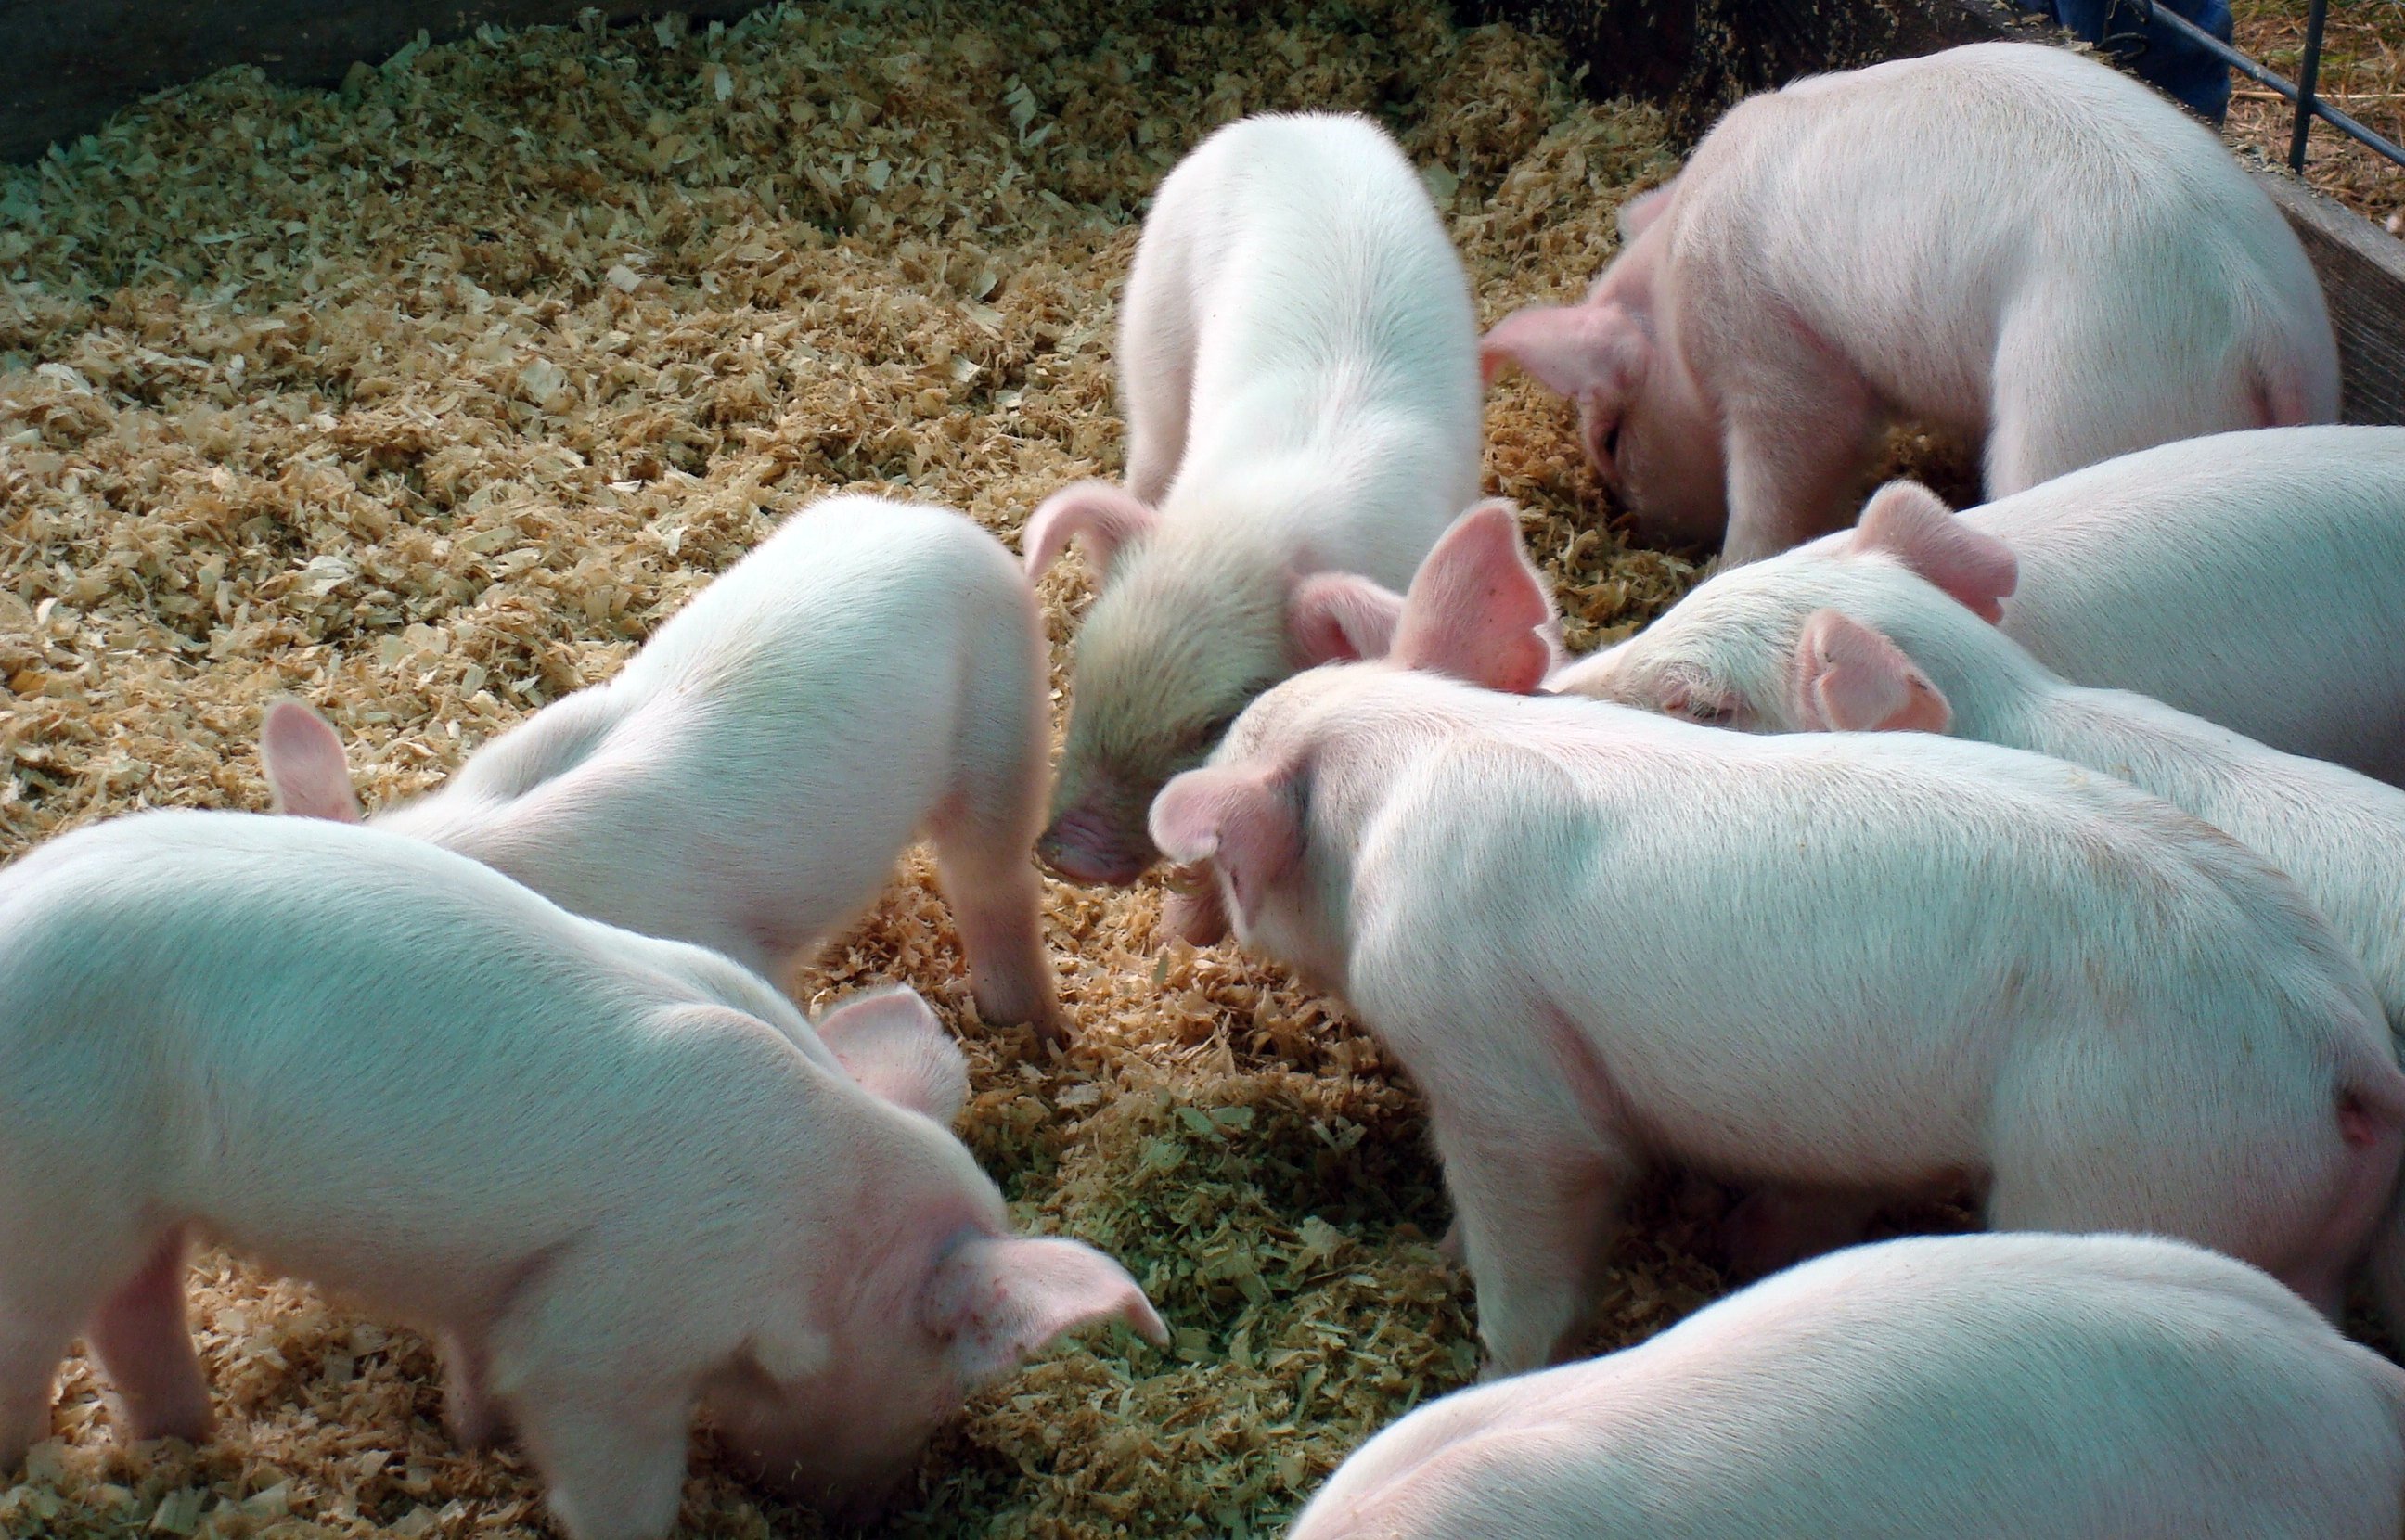 Several pigs in a pen.